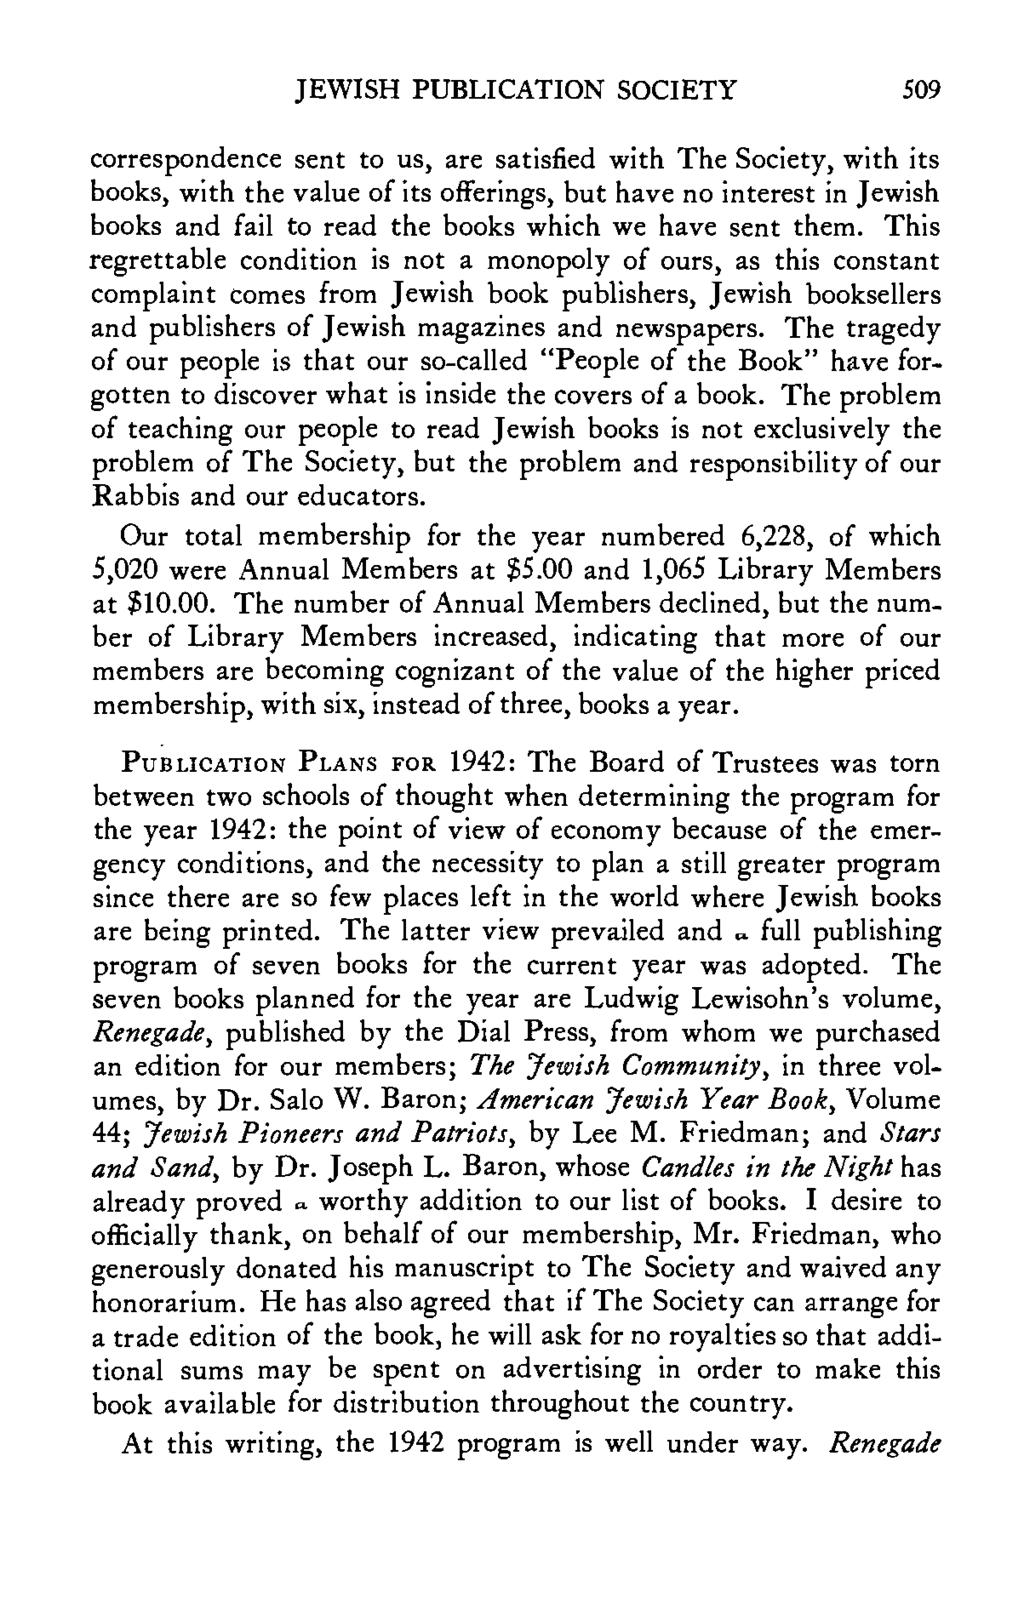 JEWISH PUBLICATION SOCIETY 509 correspondence sent to us, are satisfied with The Society, with its books, with the value of its offerings, but have no interest in Jewish books and fail to read the